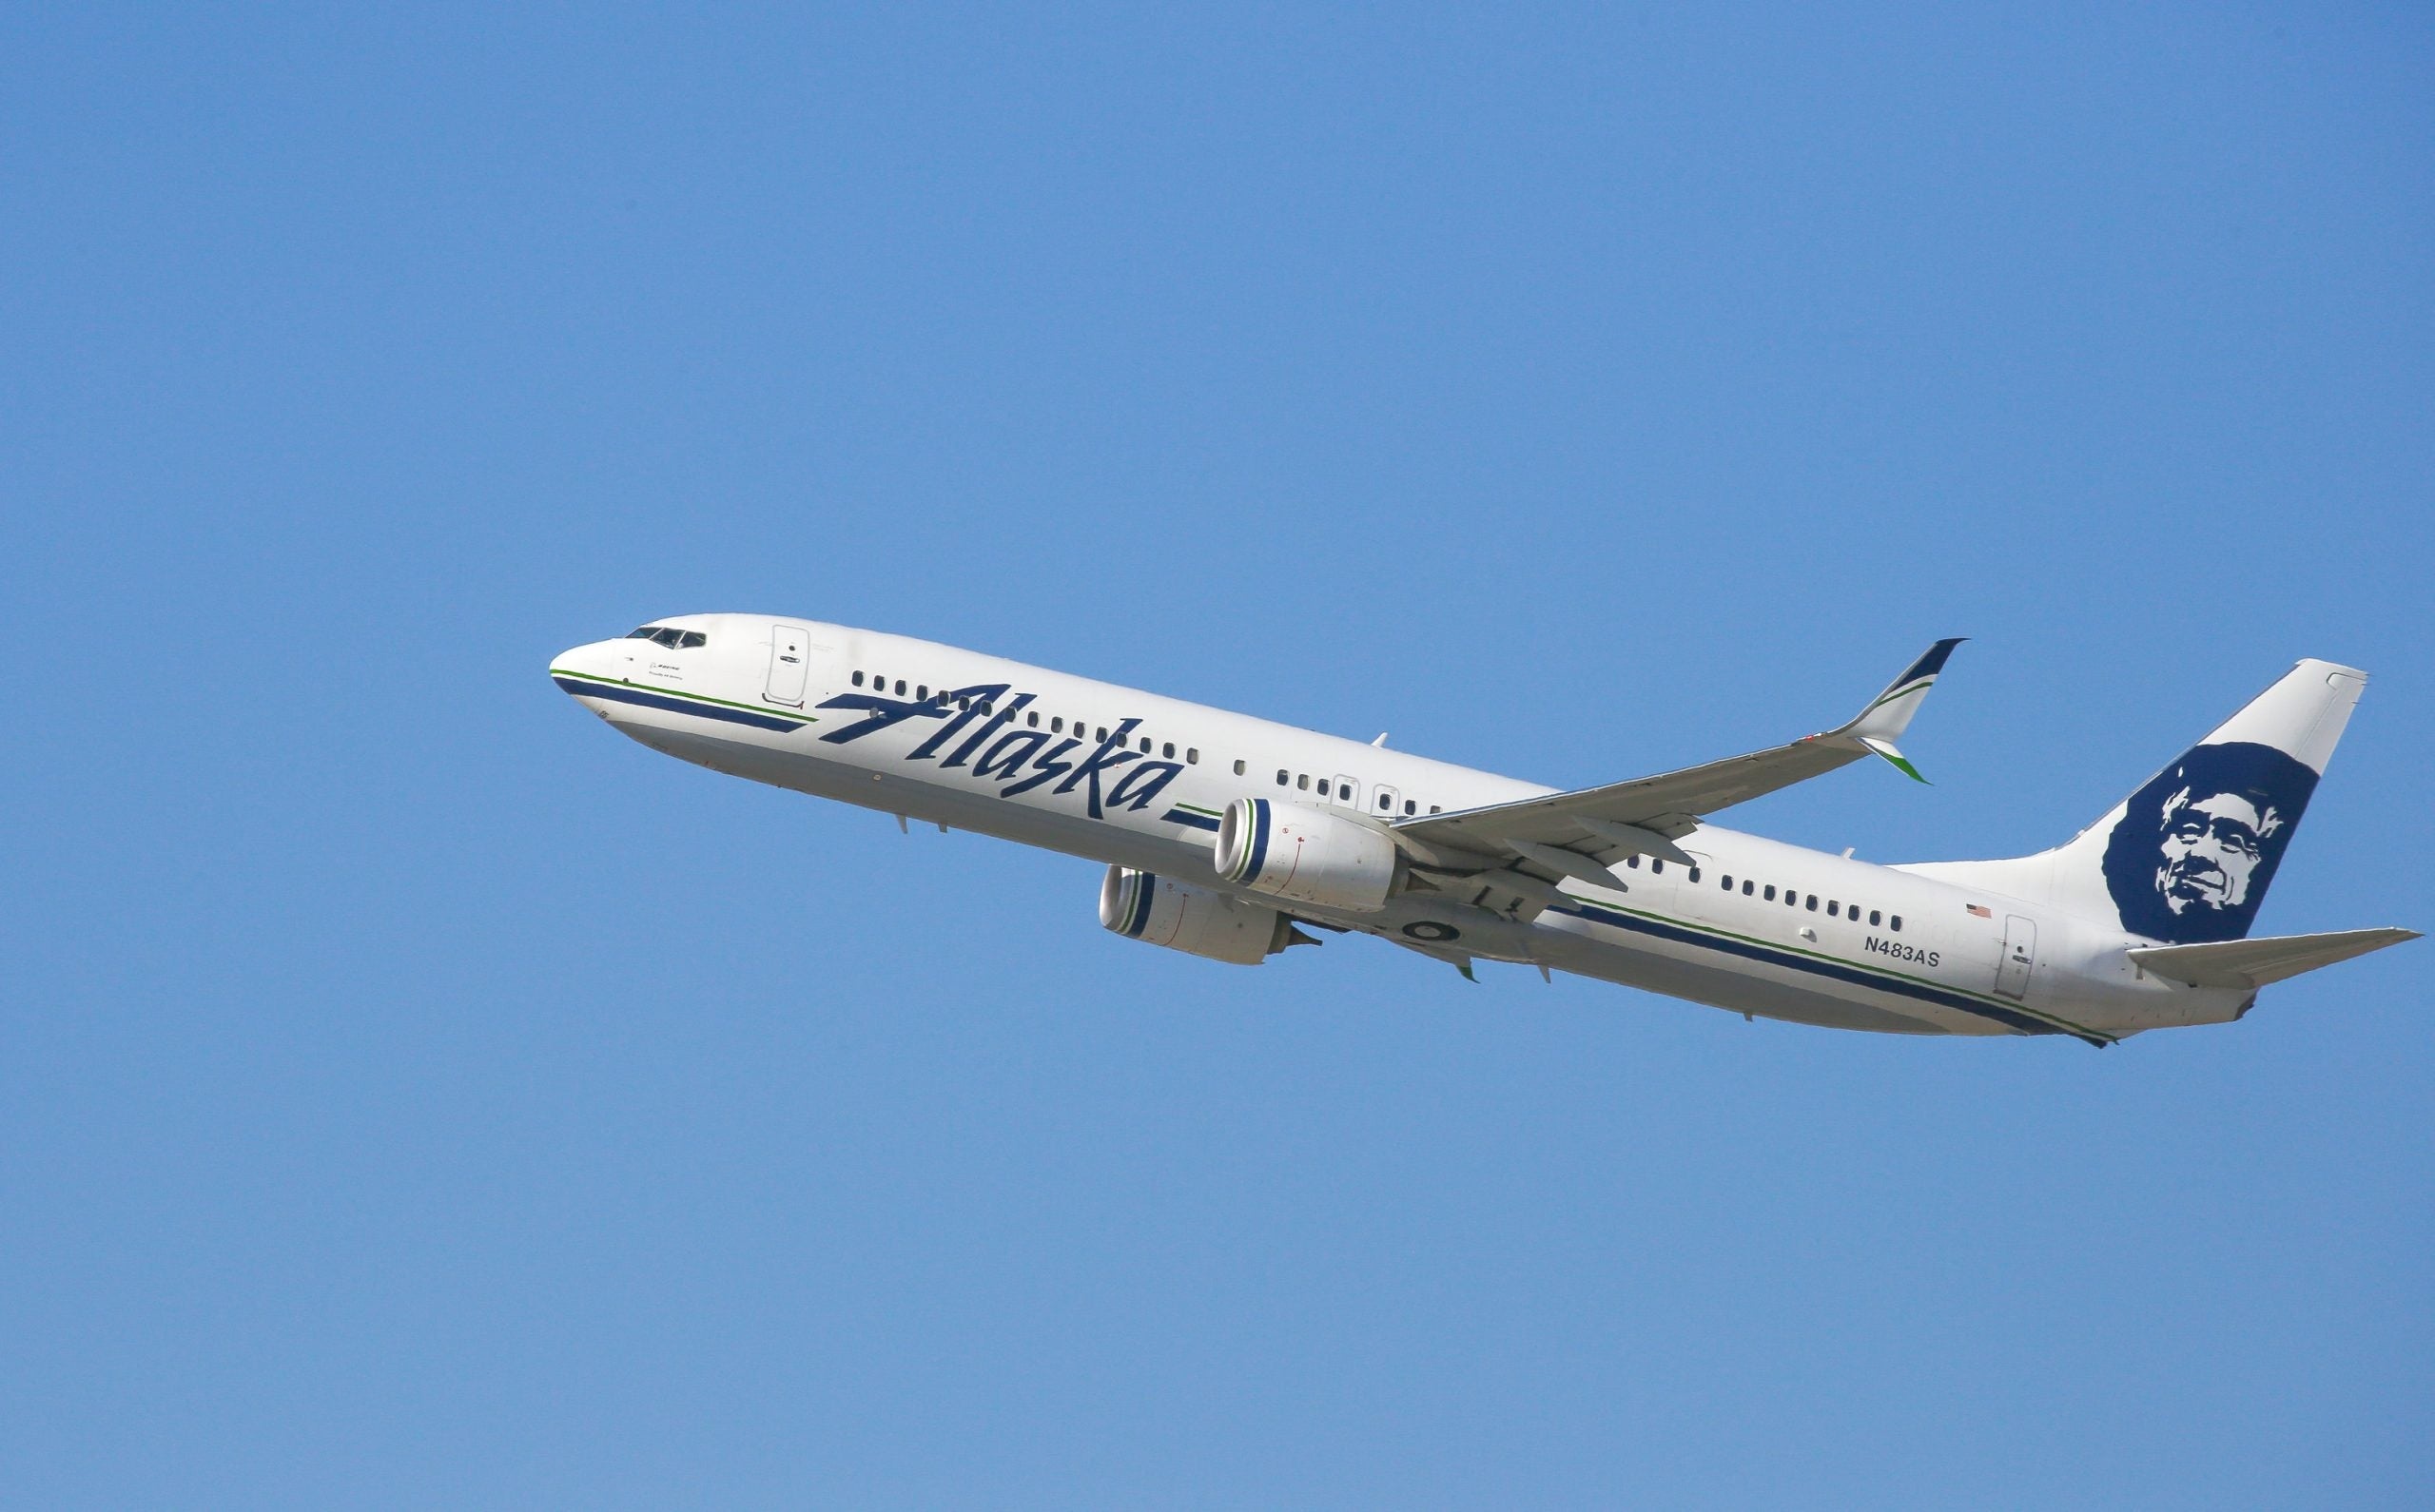 Alaska Airlines, Passenger facing charges, Threats made, Legal consequences, 2560x1590 HD Desktop